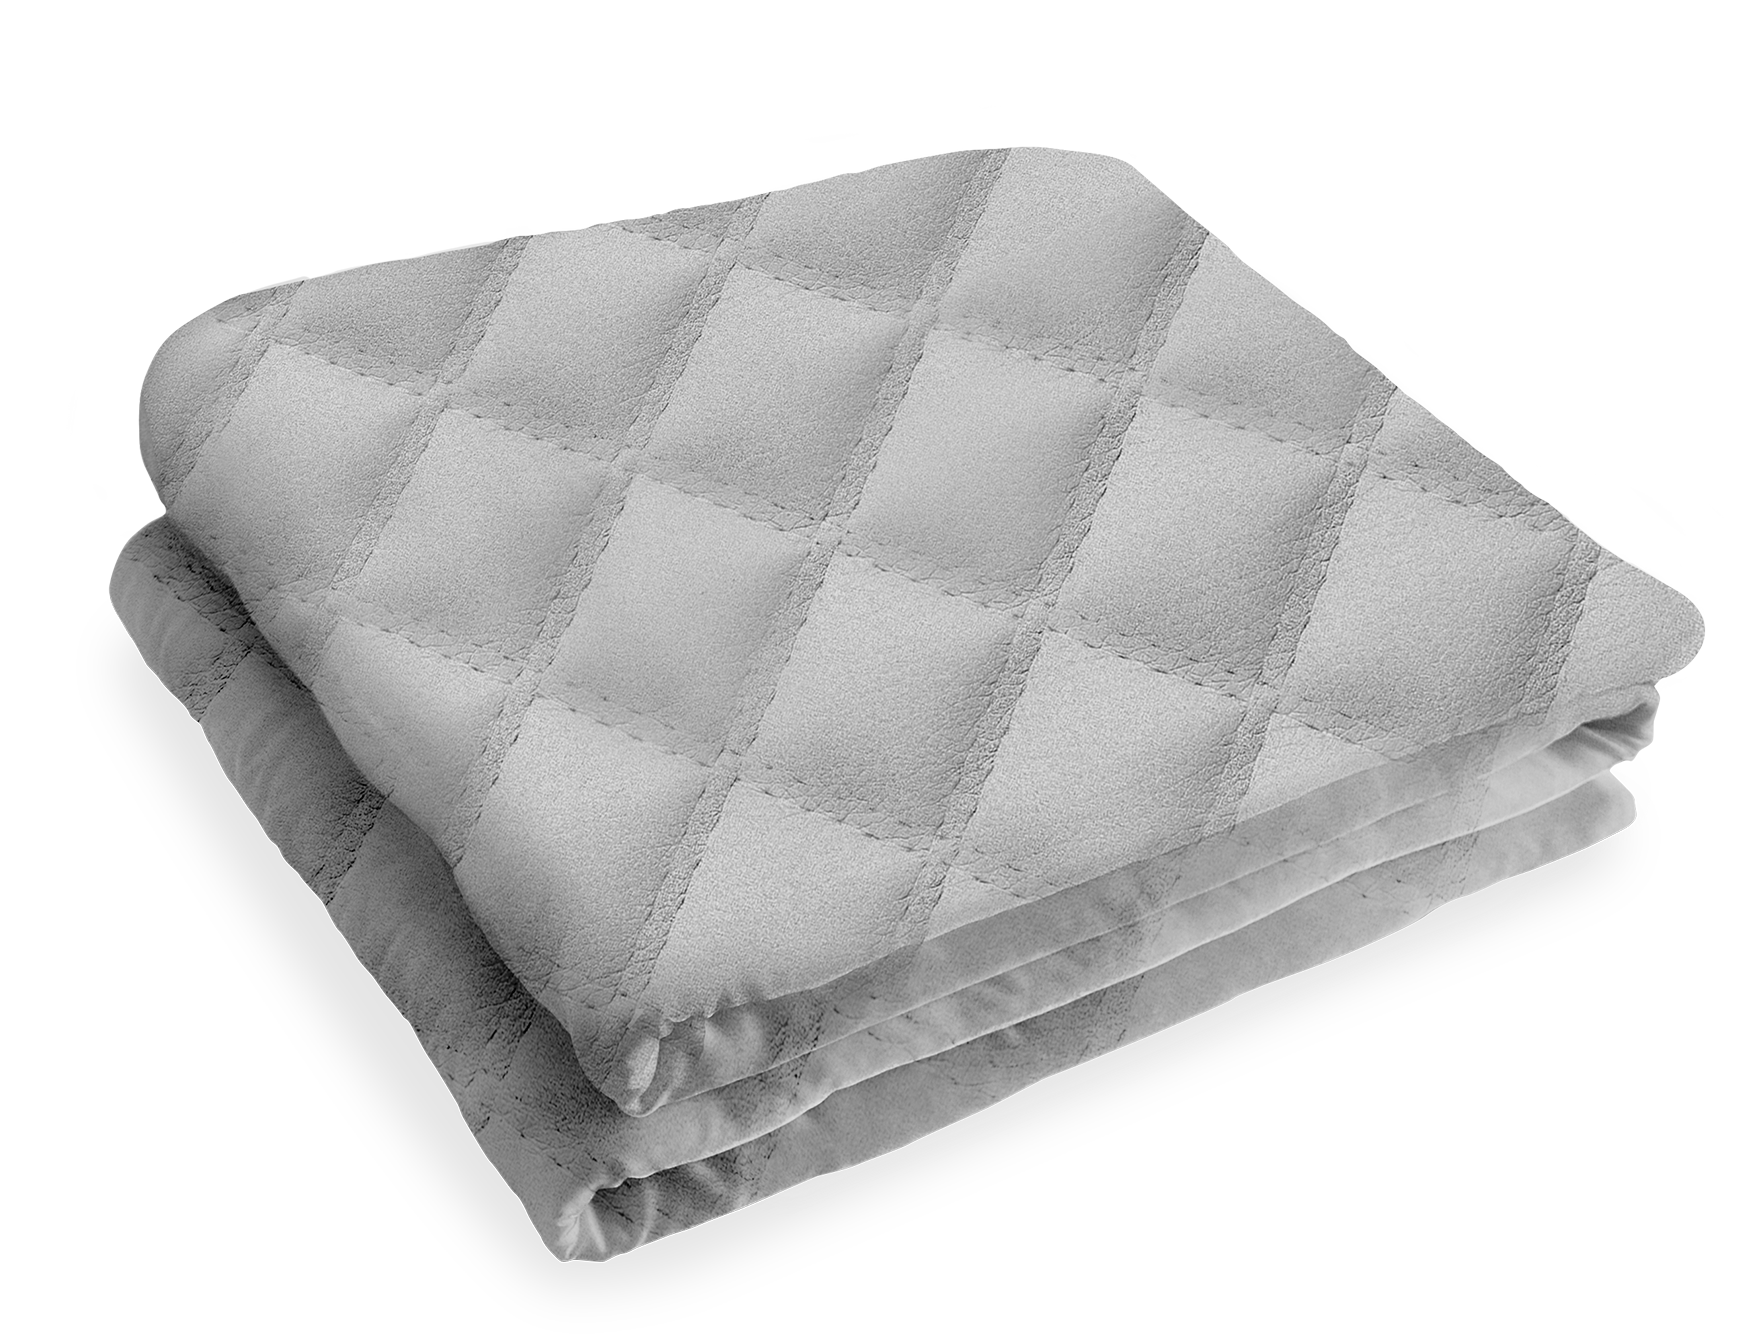 https://cdn.shopify.com/s/files/1/1740/0017/files/weighted-blanket-menu-img.png?v=1614745233